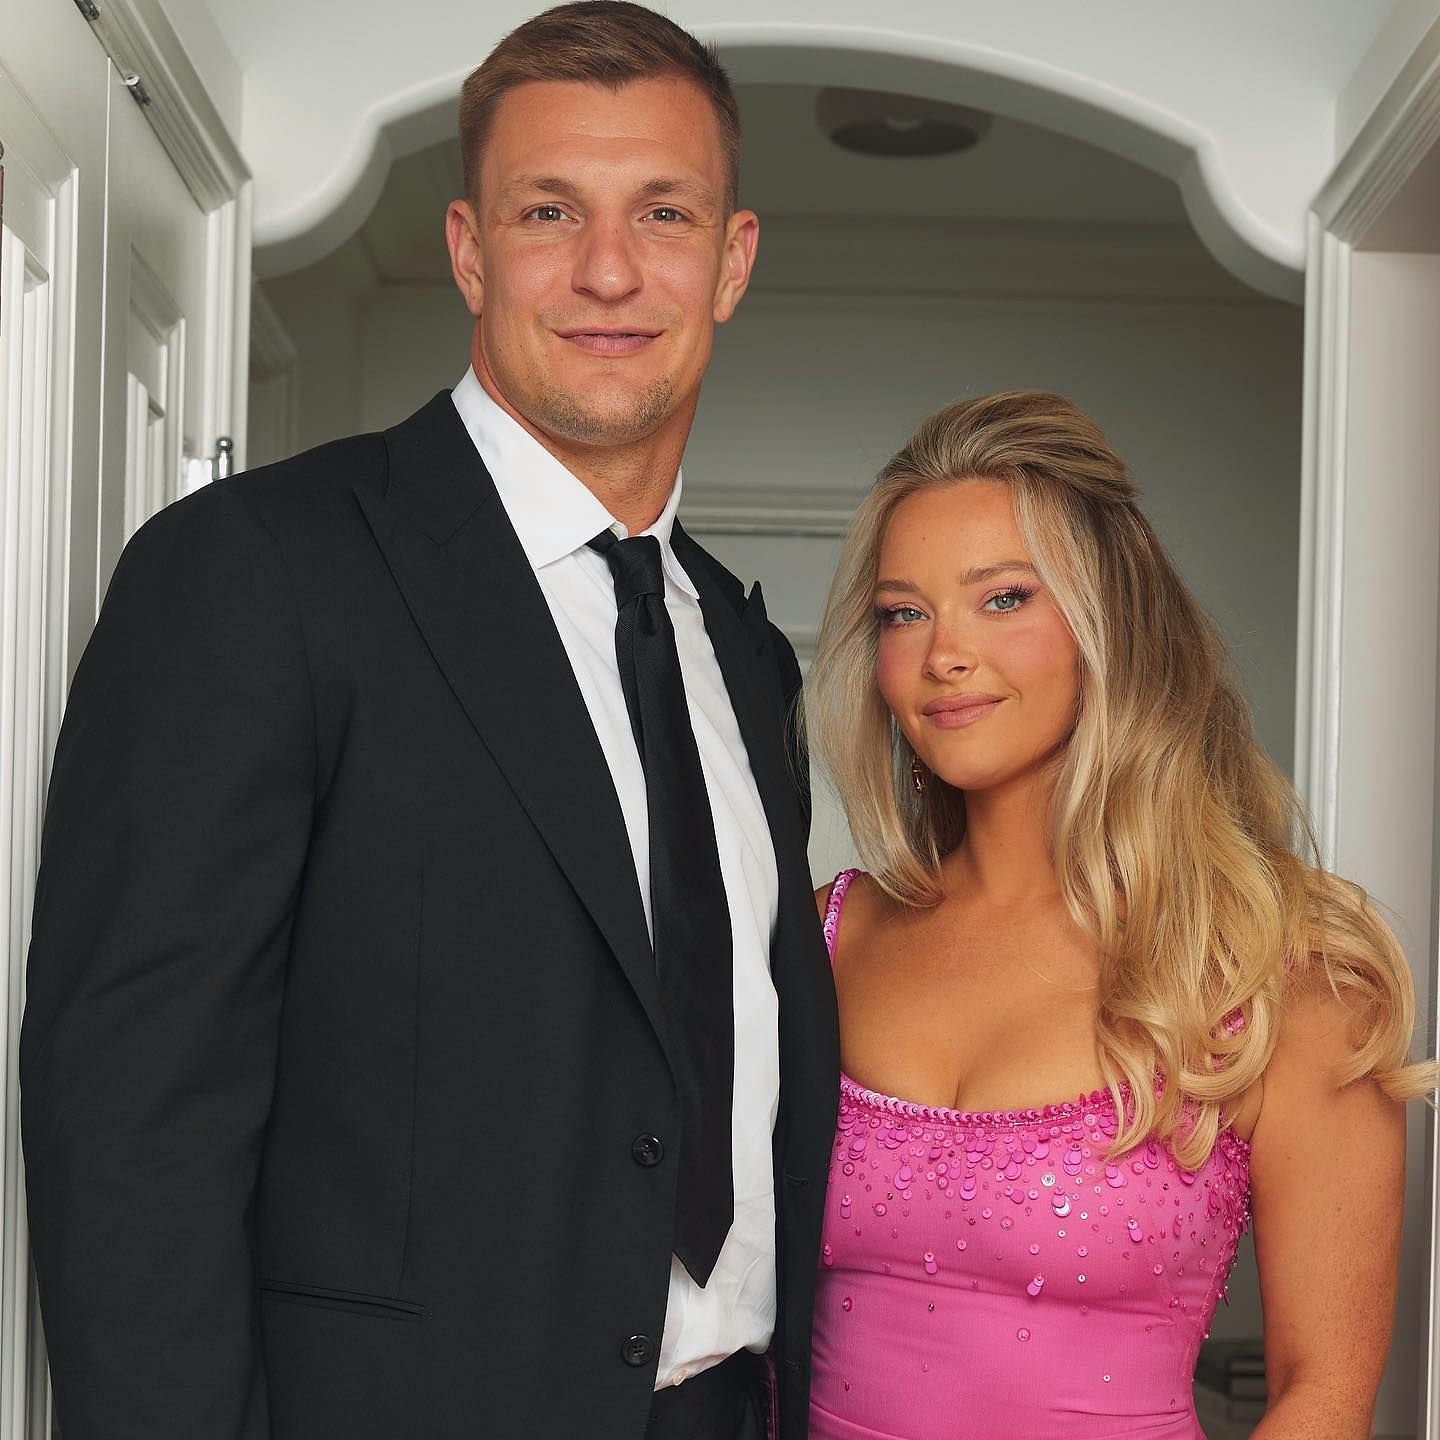 Rob Gronkowski and his partner Camille